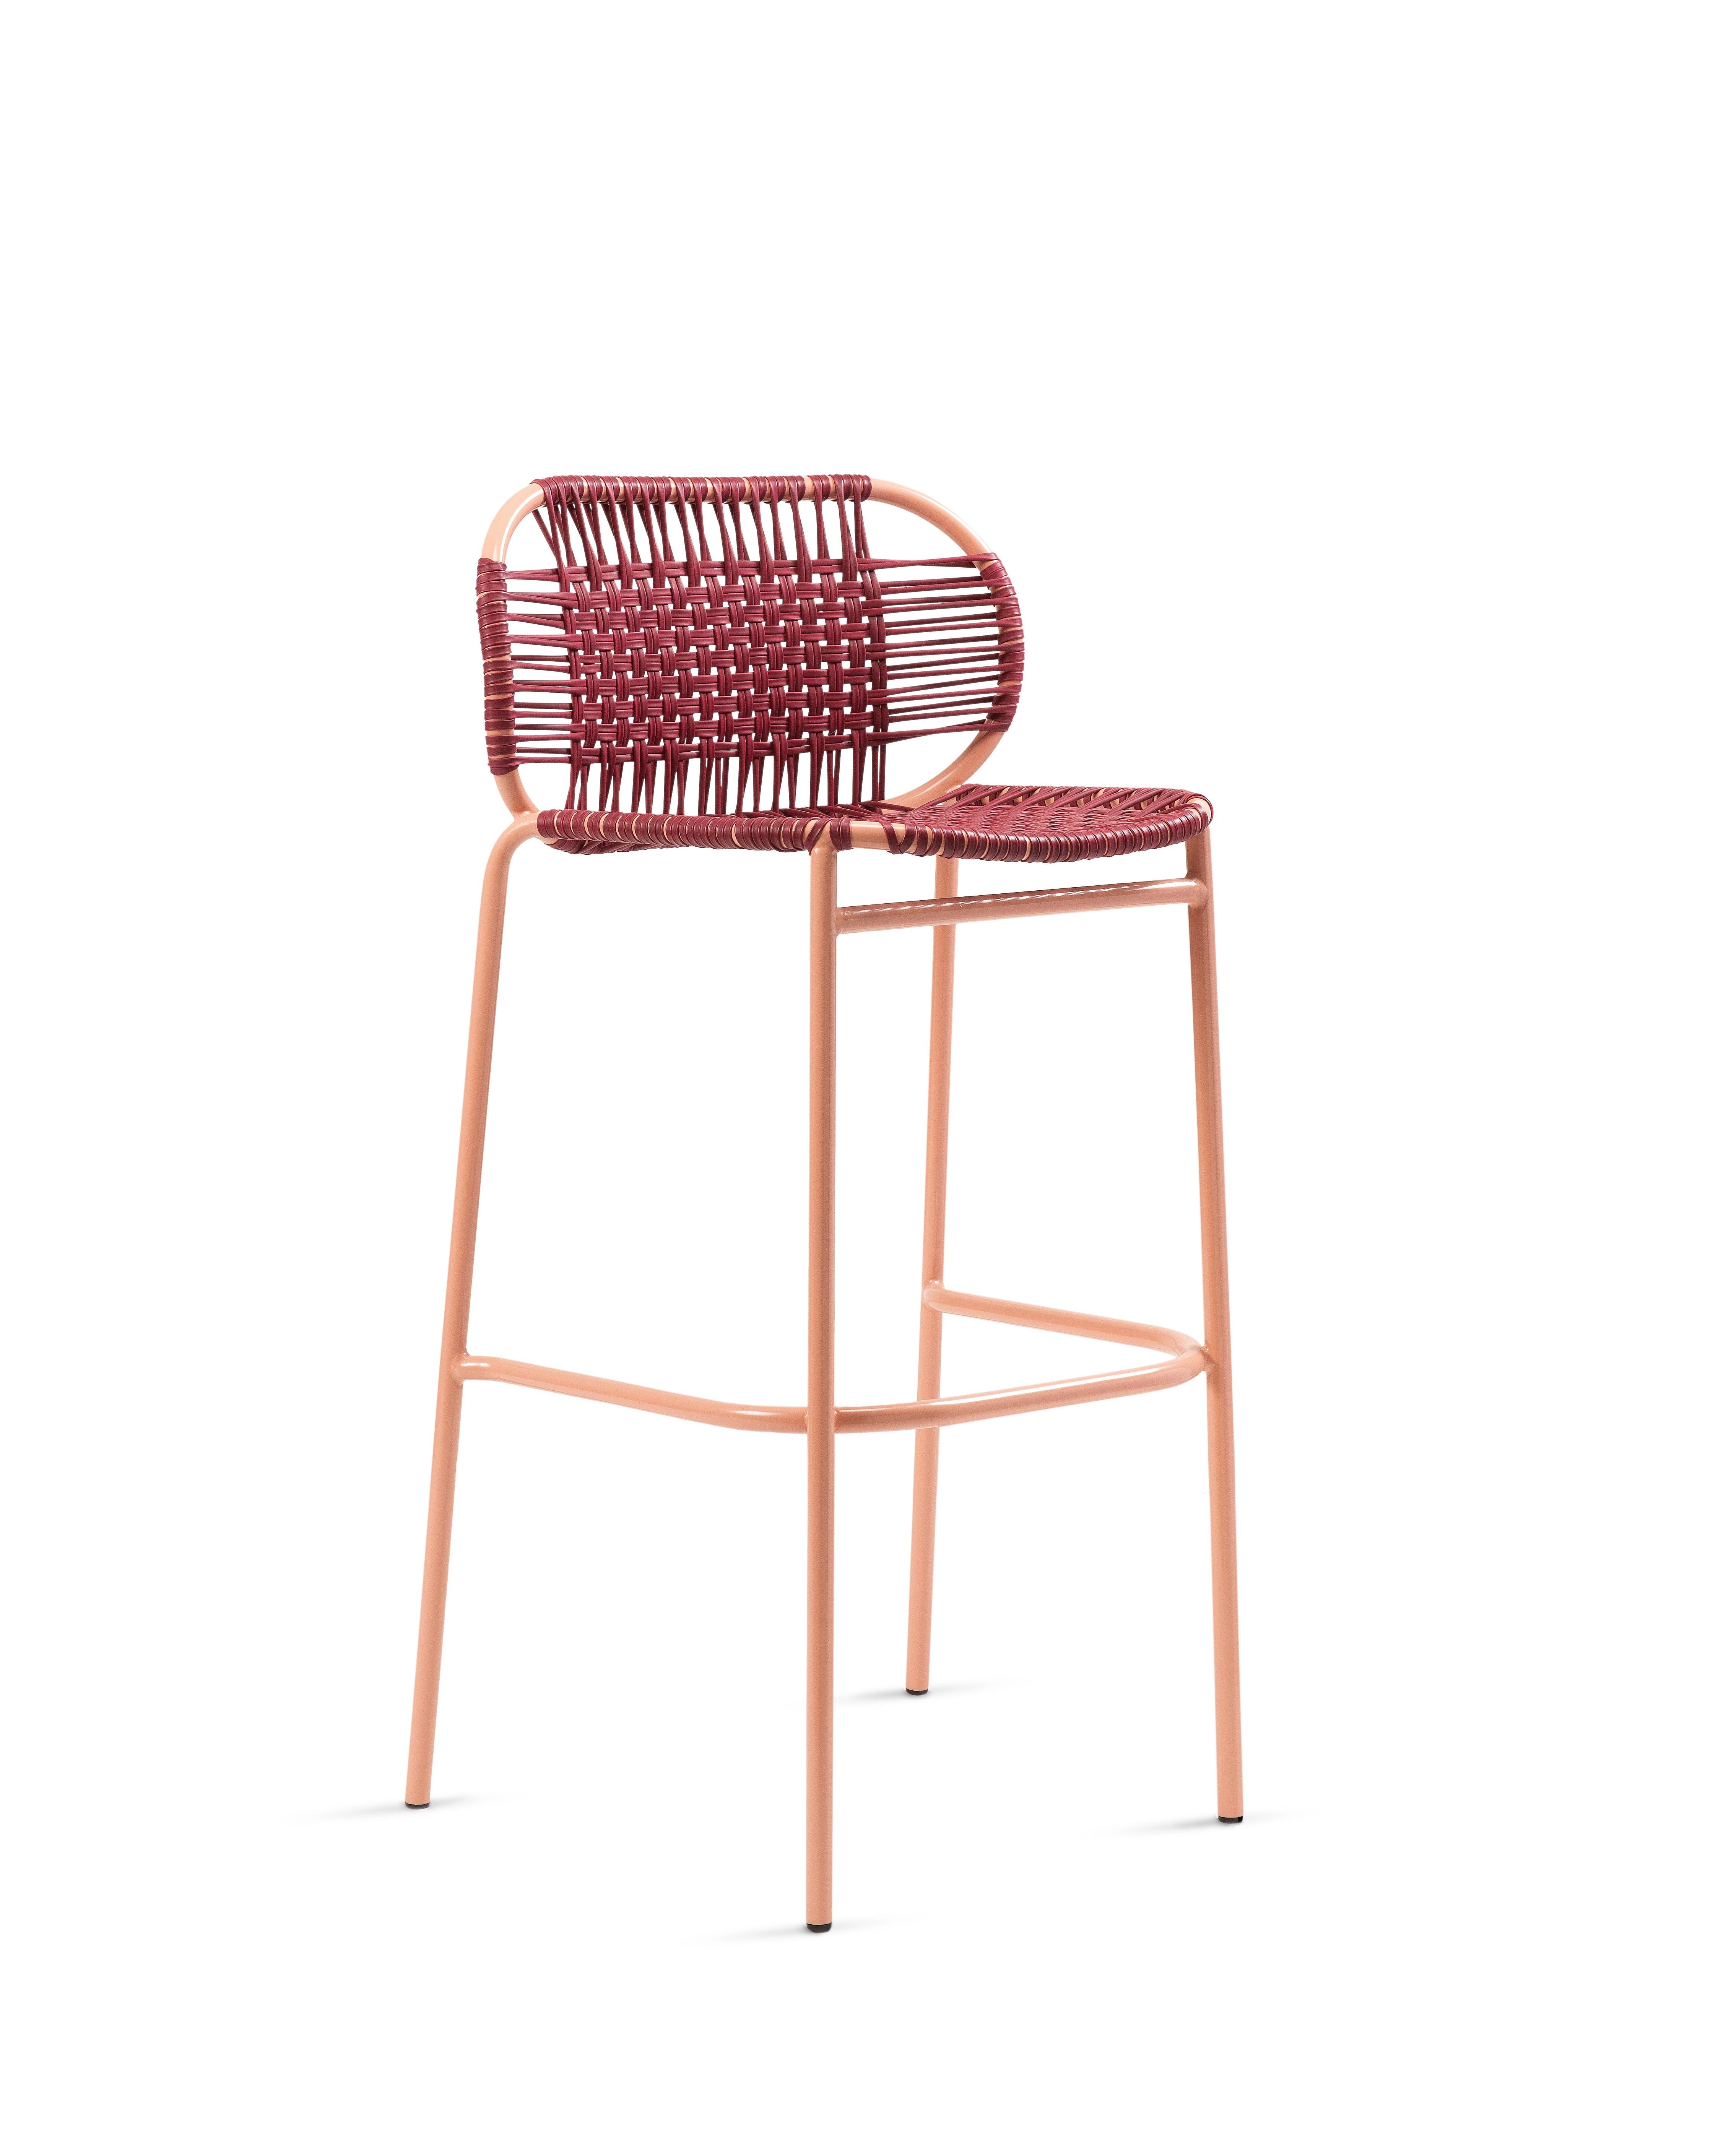 Set of 4 Purple Cielo bar stool by Sebastian Herkner
Materials: Galvanized and powder-coated tubular steel. PVC strings are made from recycled plastic.
Technique: Made from recycled plastic and weaved by local craftspeople in Cartagena, Colombia.